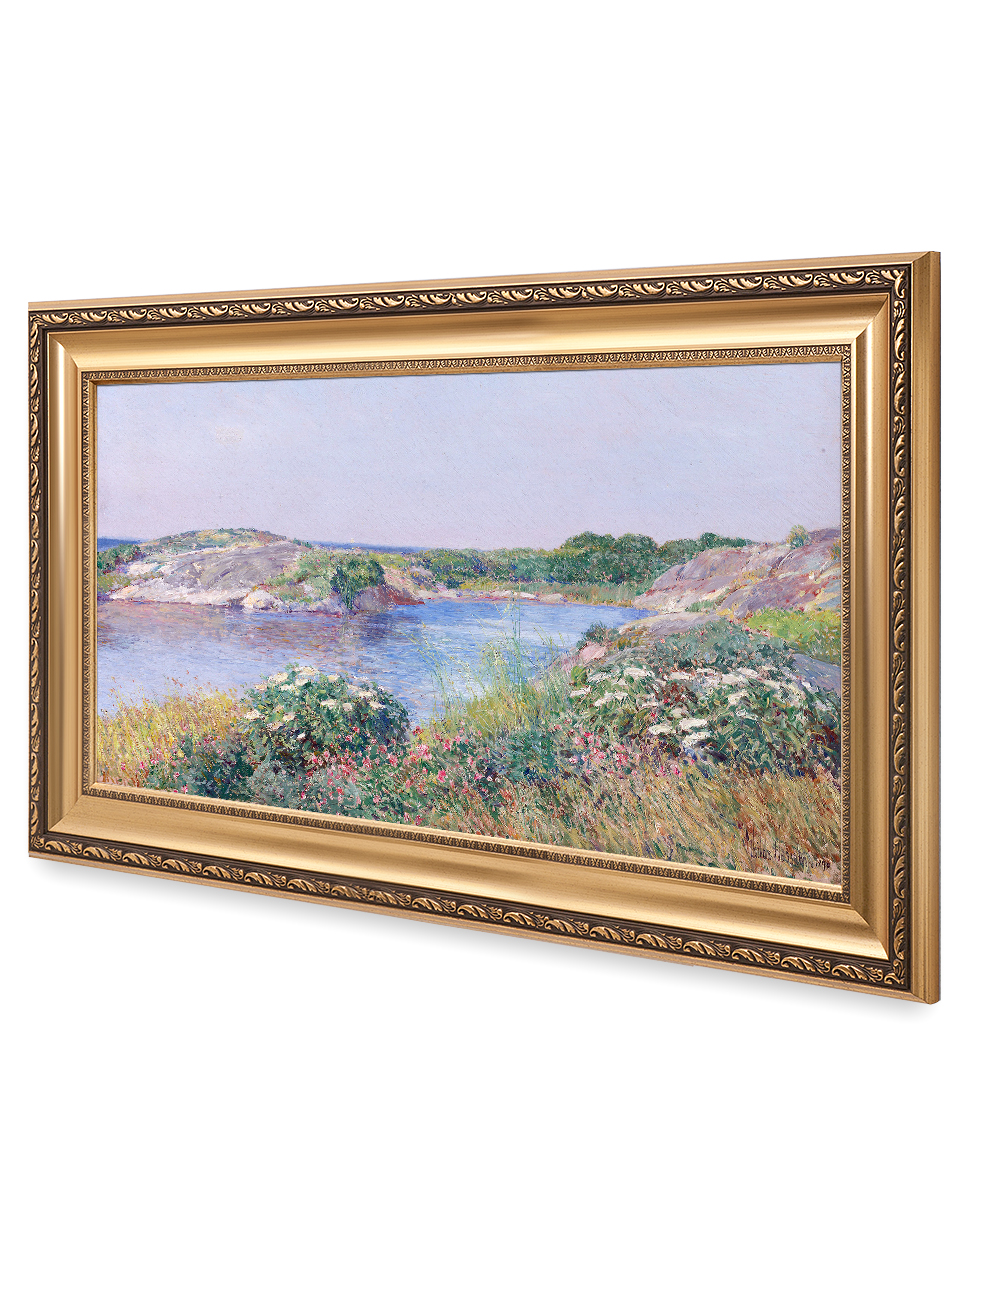 DECORARTS The Little Pond, Appledore by Childe Hassam, Giclee Print on  Canvas. Ready to Hang Framed Wall Art for Home and Office Decor. Total Size  w/ Frame: 36x22